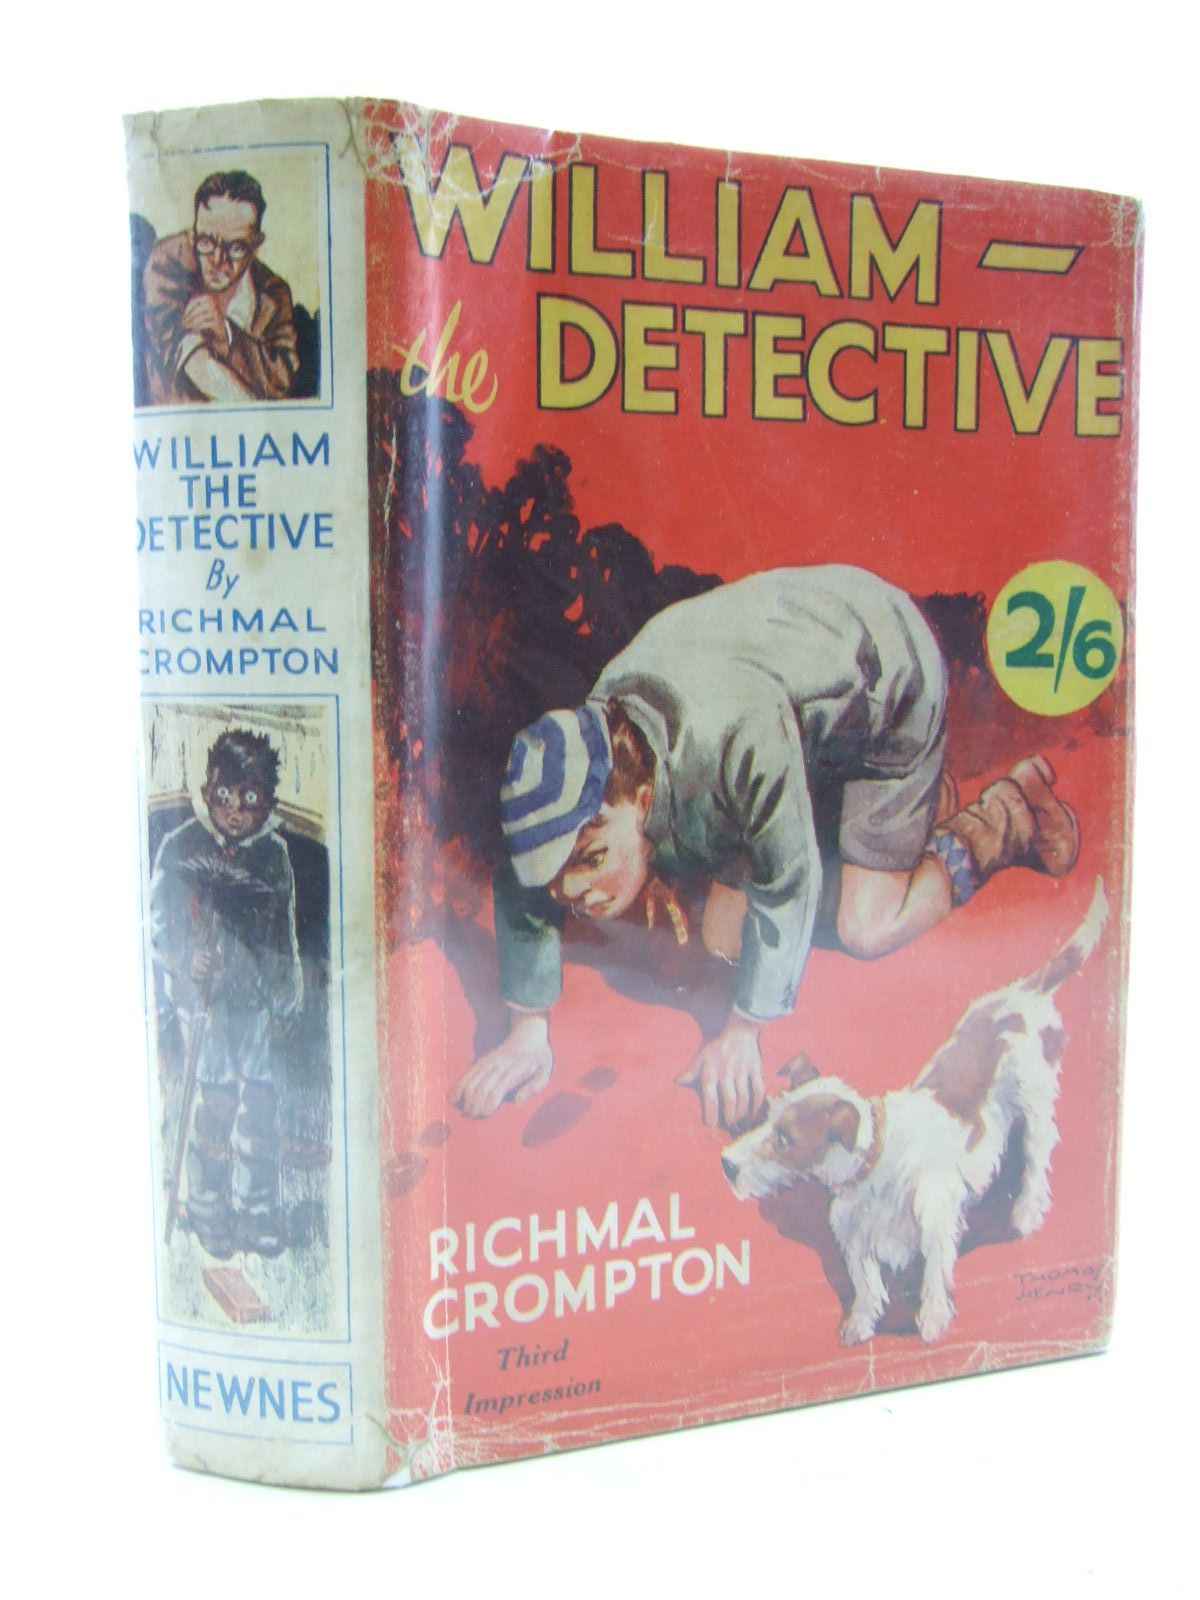 Cover of WILLIAM THE DETECTIVE by Richmal Crompton